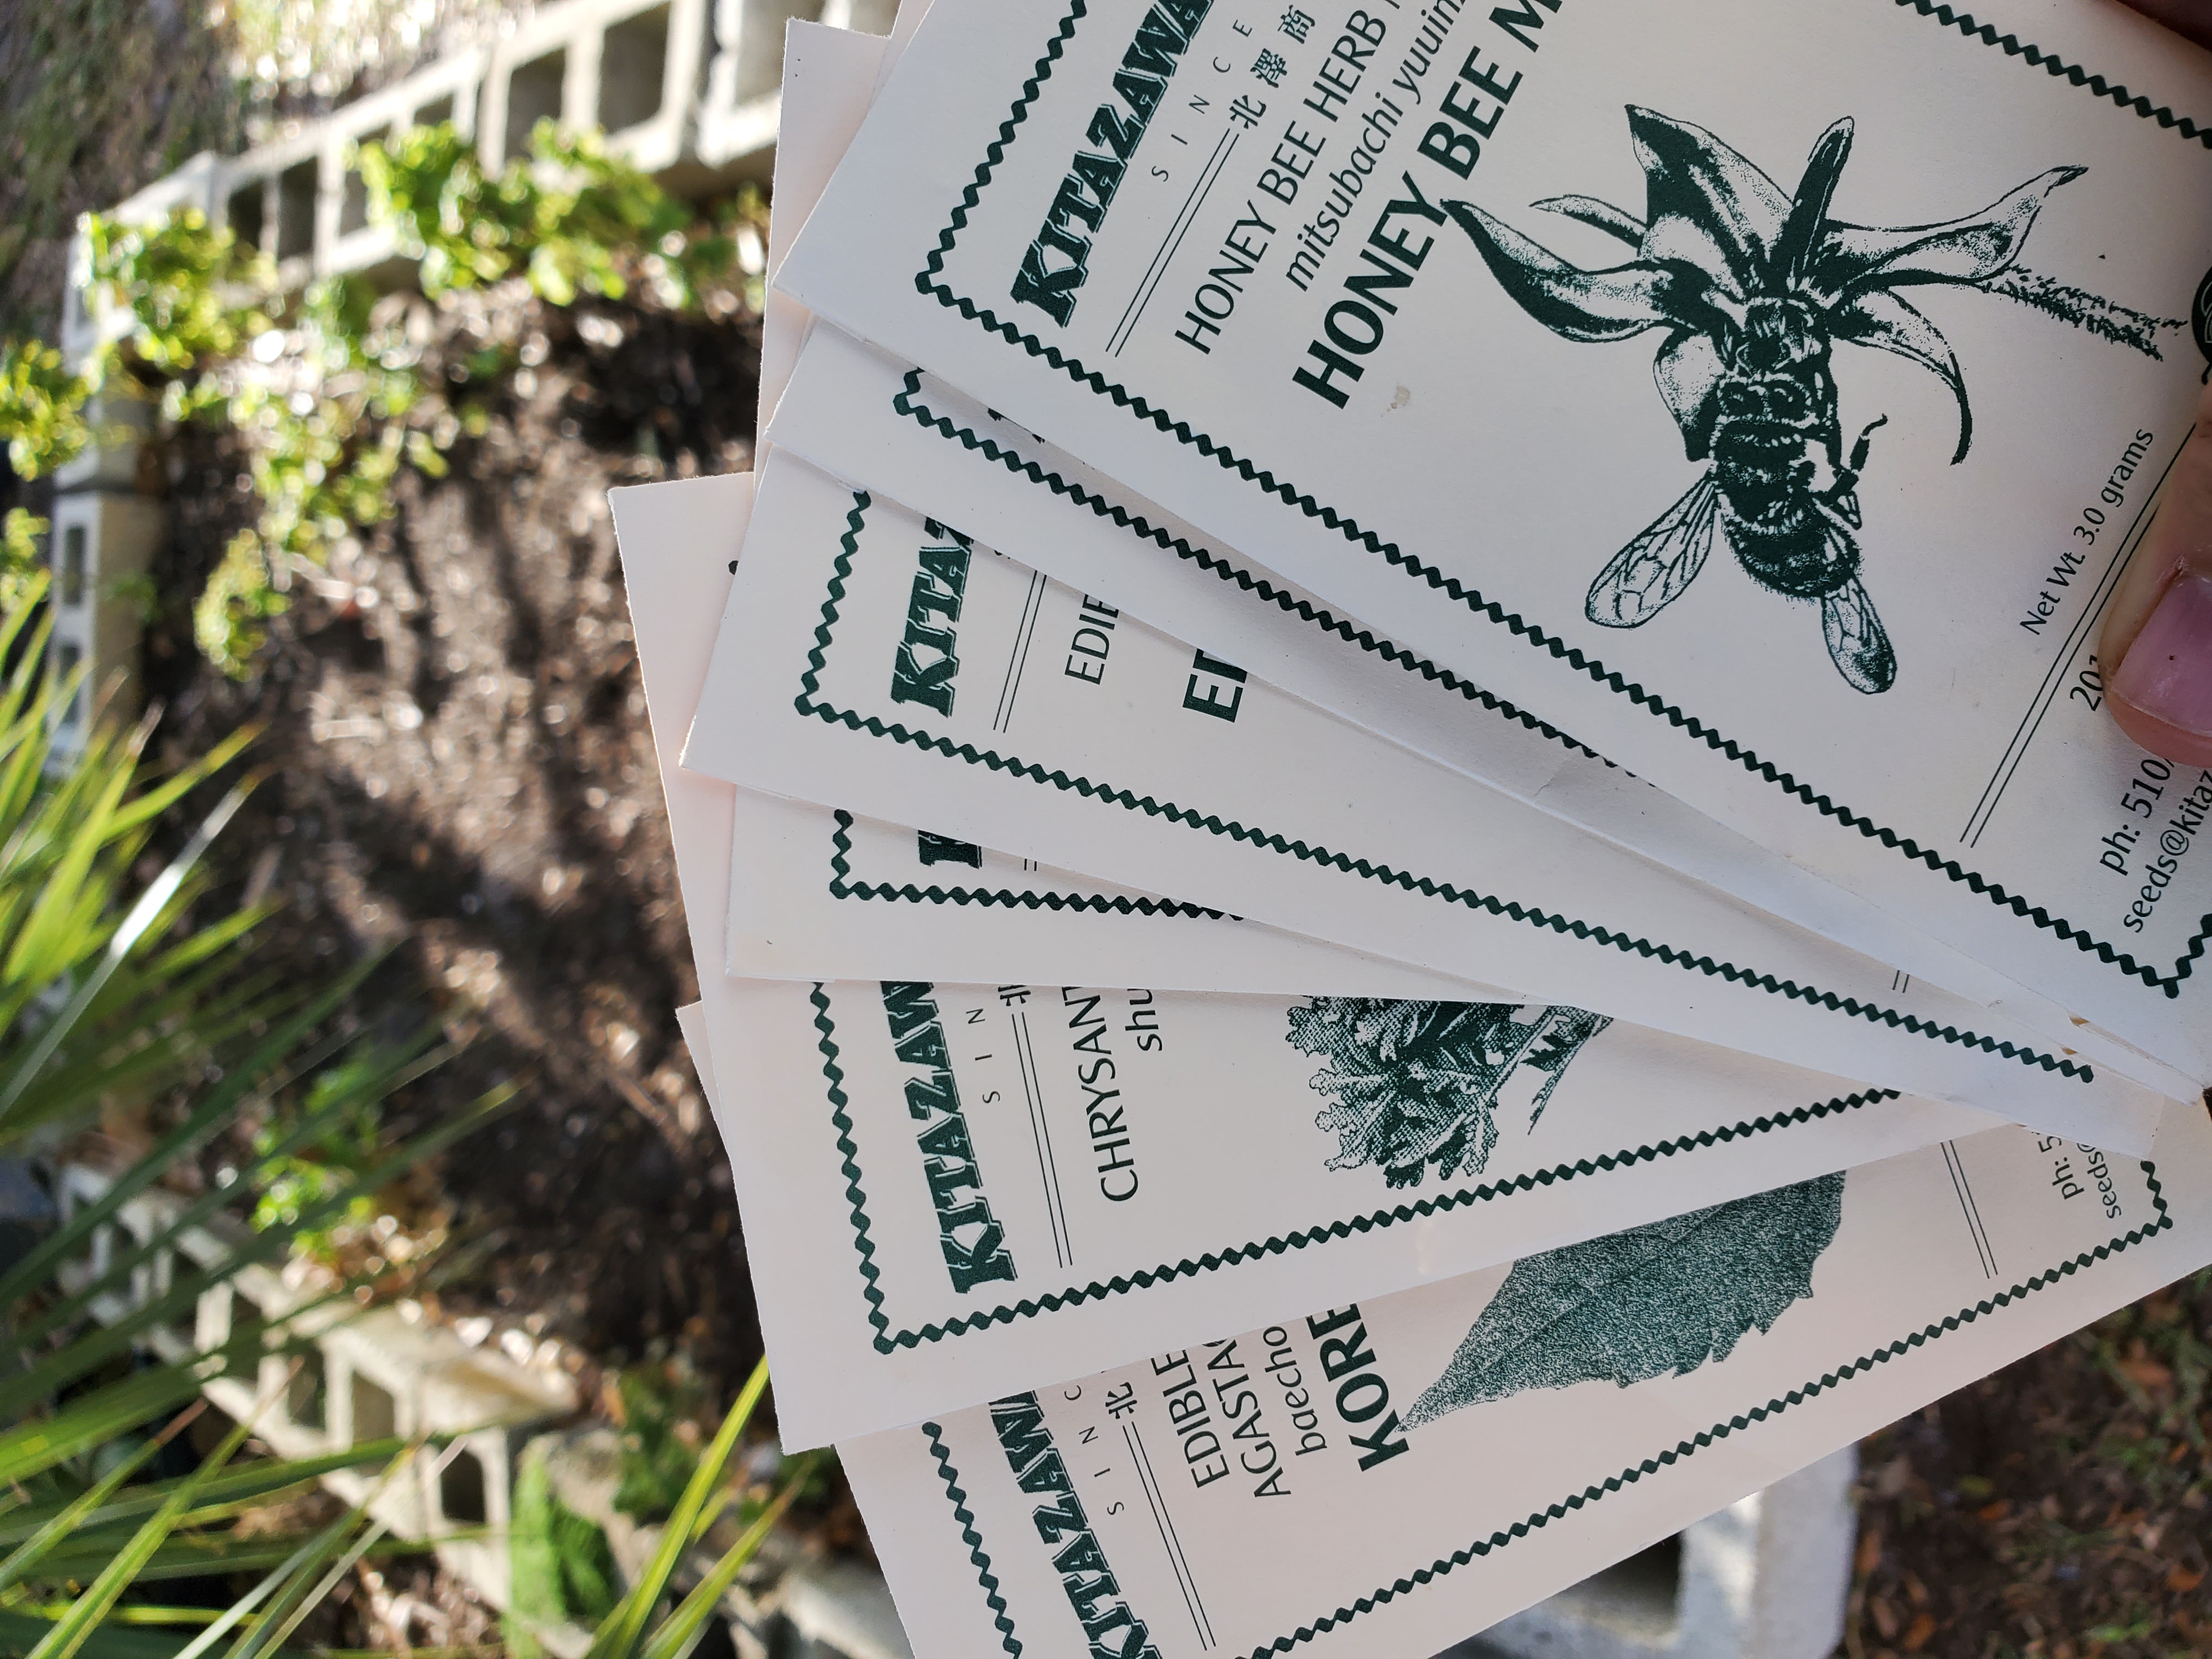 Seed packets in front of my container garden